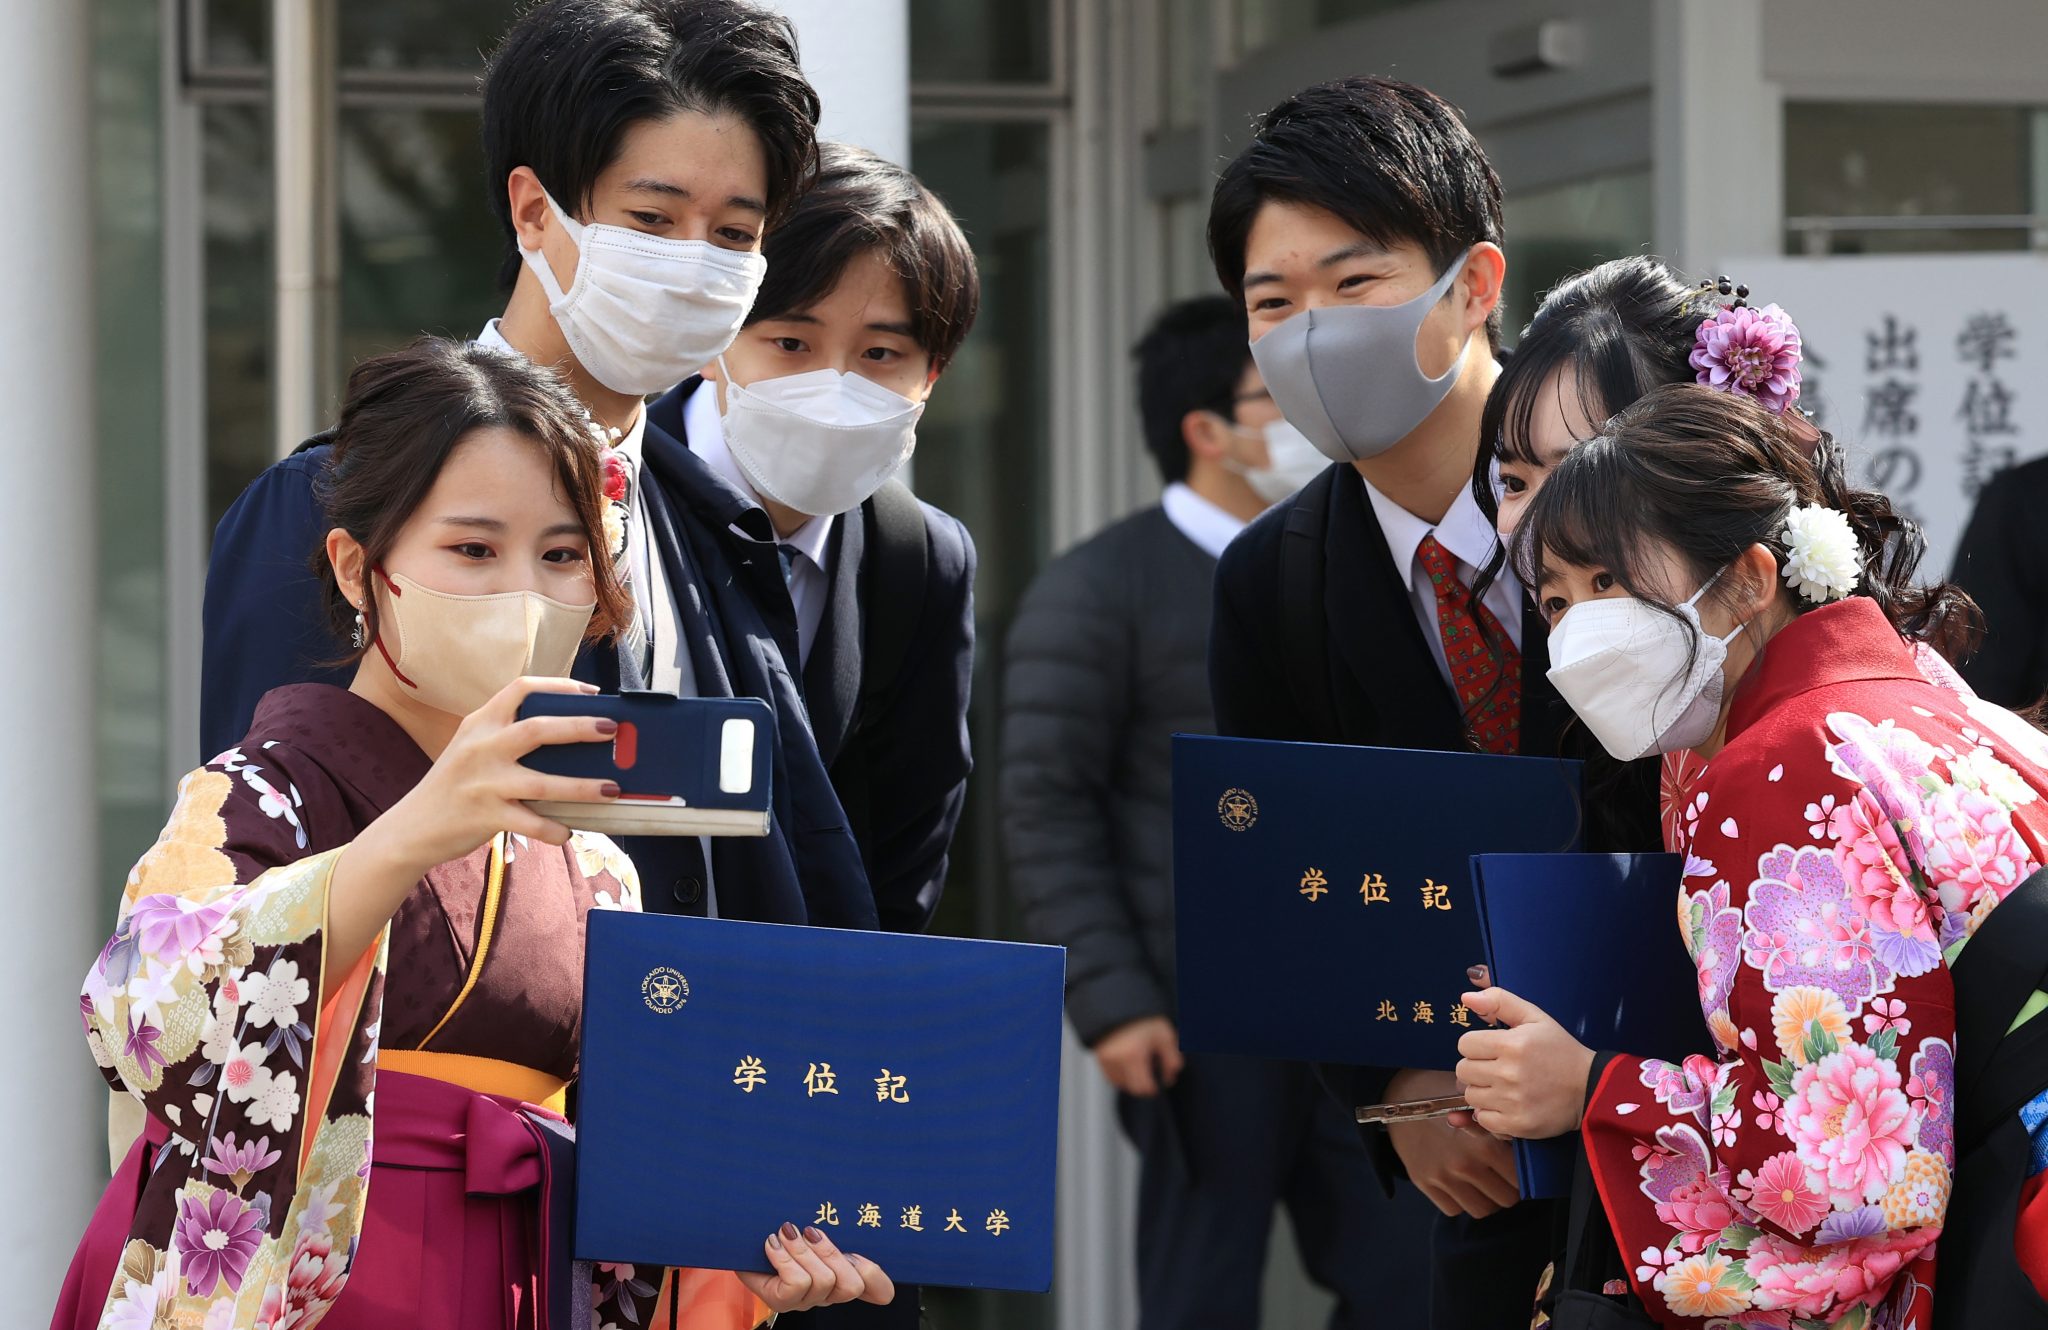 Equally accessible tertiary education in Japan still faces obstacles